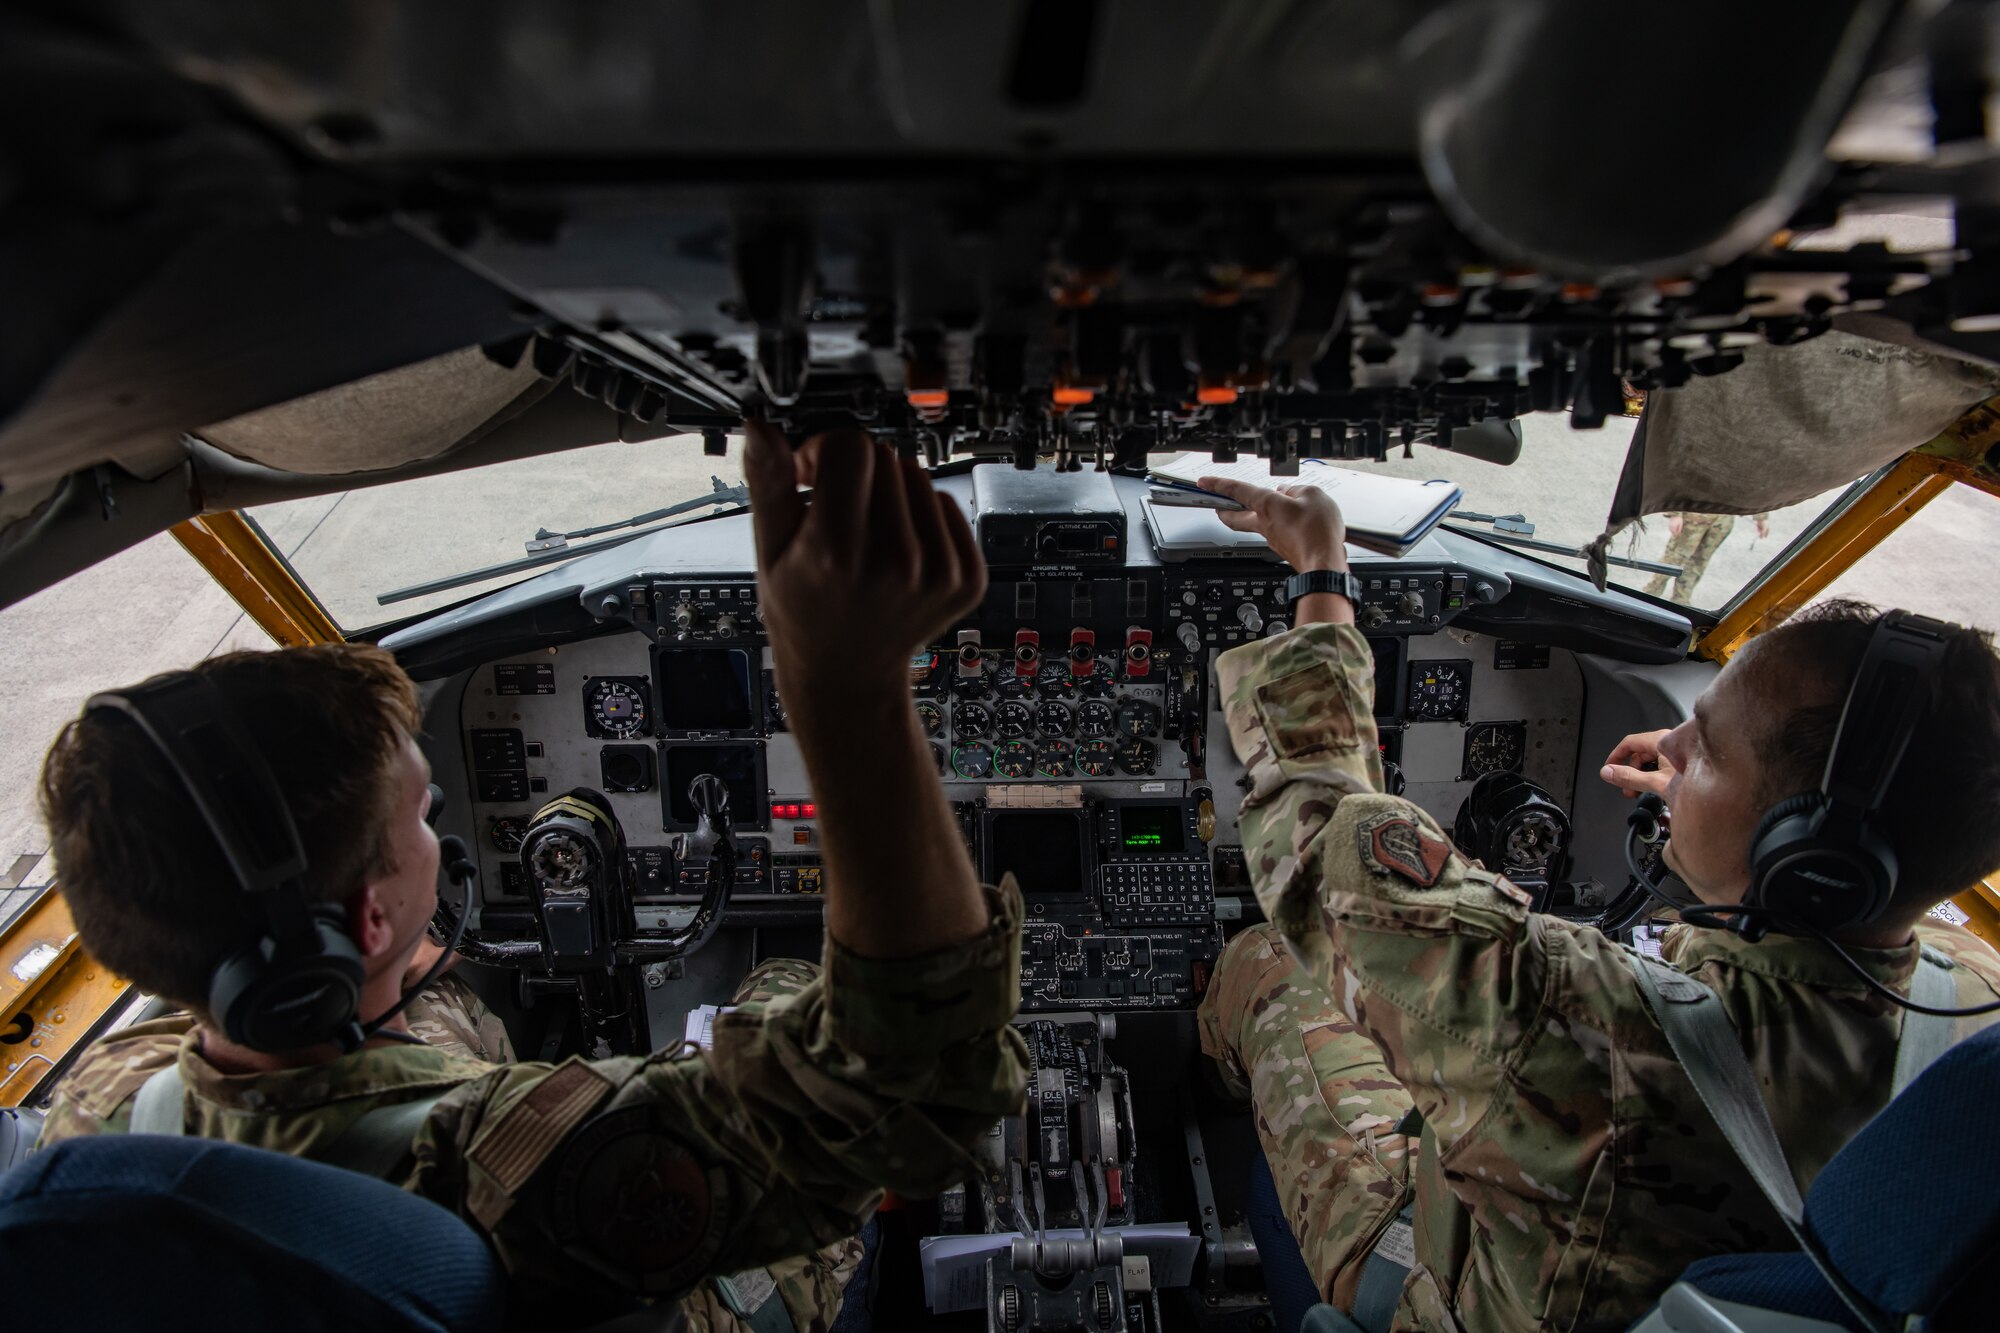 U.S. Air Force Capt. Daniel Thomas (left), 909th Air Refueling Squadron pilot, and Maj. Elliott Sahli, 909th ARS instructor pilot, conduct a preflight check for a KC-135 Stratotanker at Kadena Air Base, Japan in support of Large Scale Global Exercise 21, Aug., 18, 2021. The U.S. joint forces remains ready to respond to the full spectrum of conflict and disaster. (U.S. Air Force photo by Tech. Sgt. Micaiah Anthony)